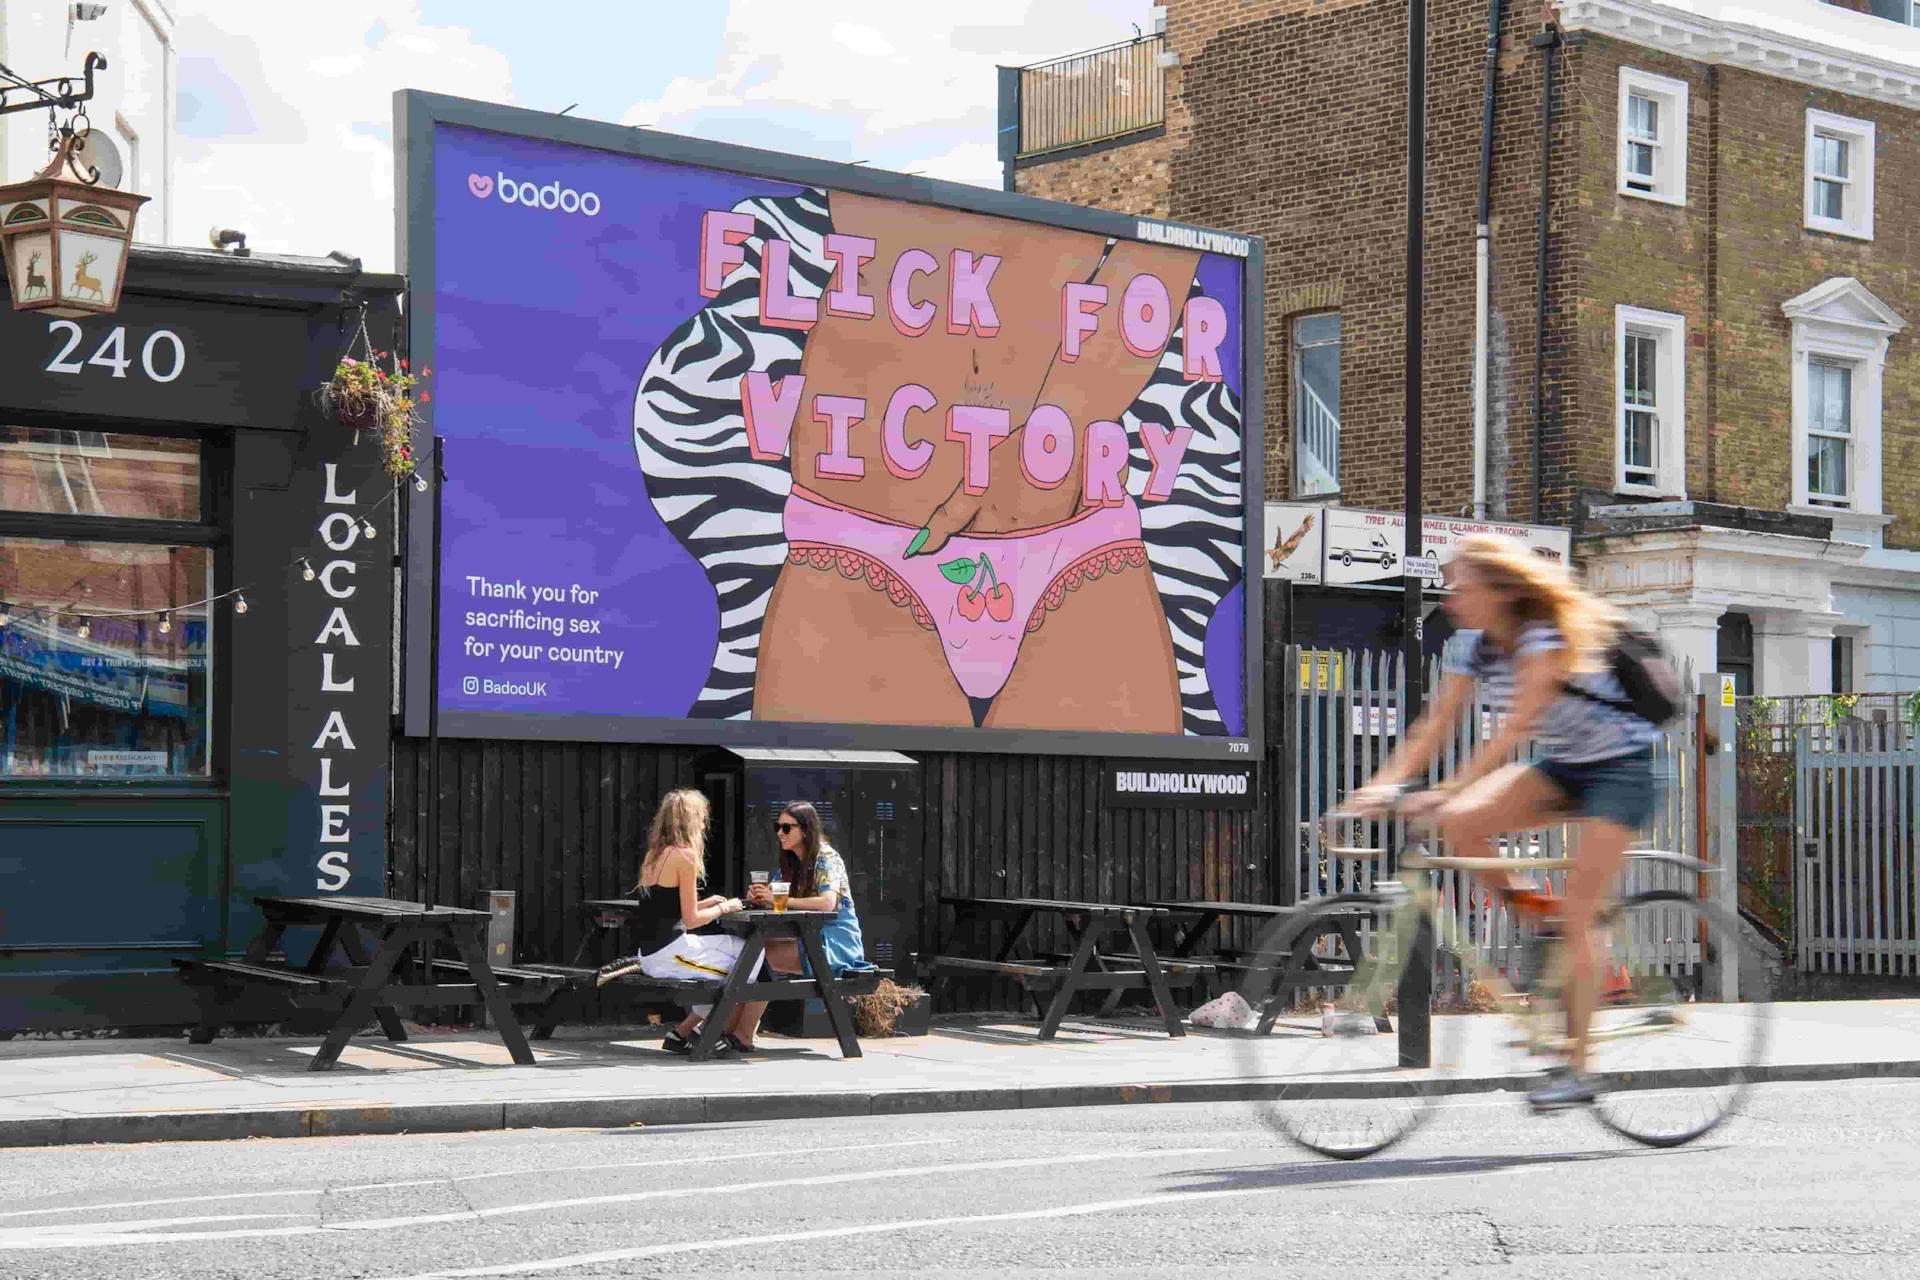 Flick for victory: new campaign thanks Brits for practising self-love